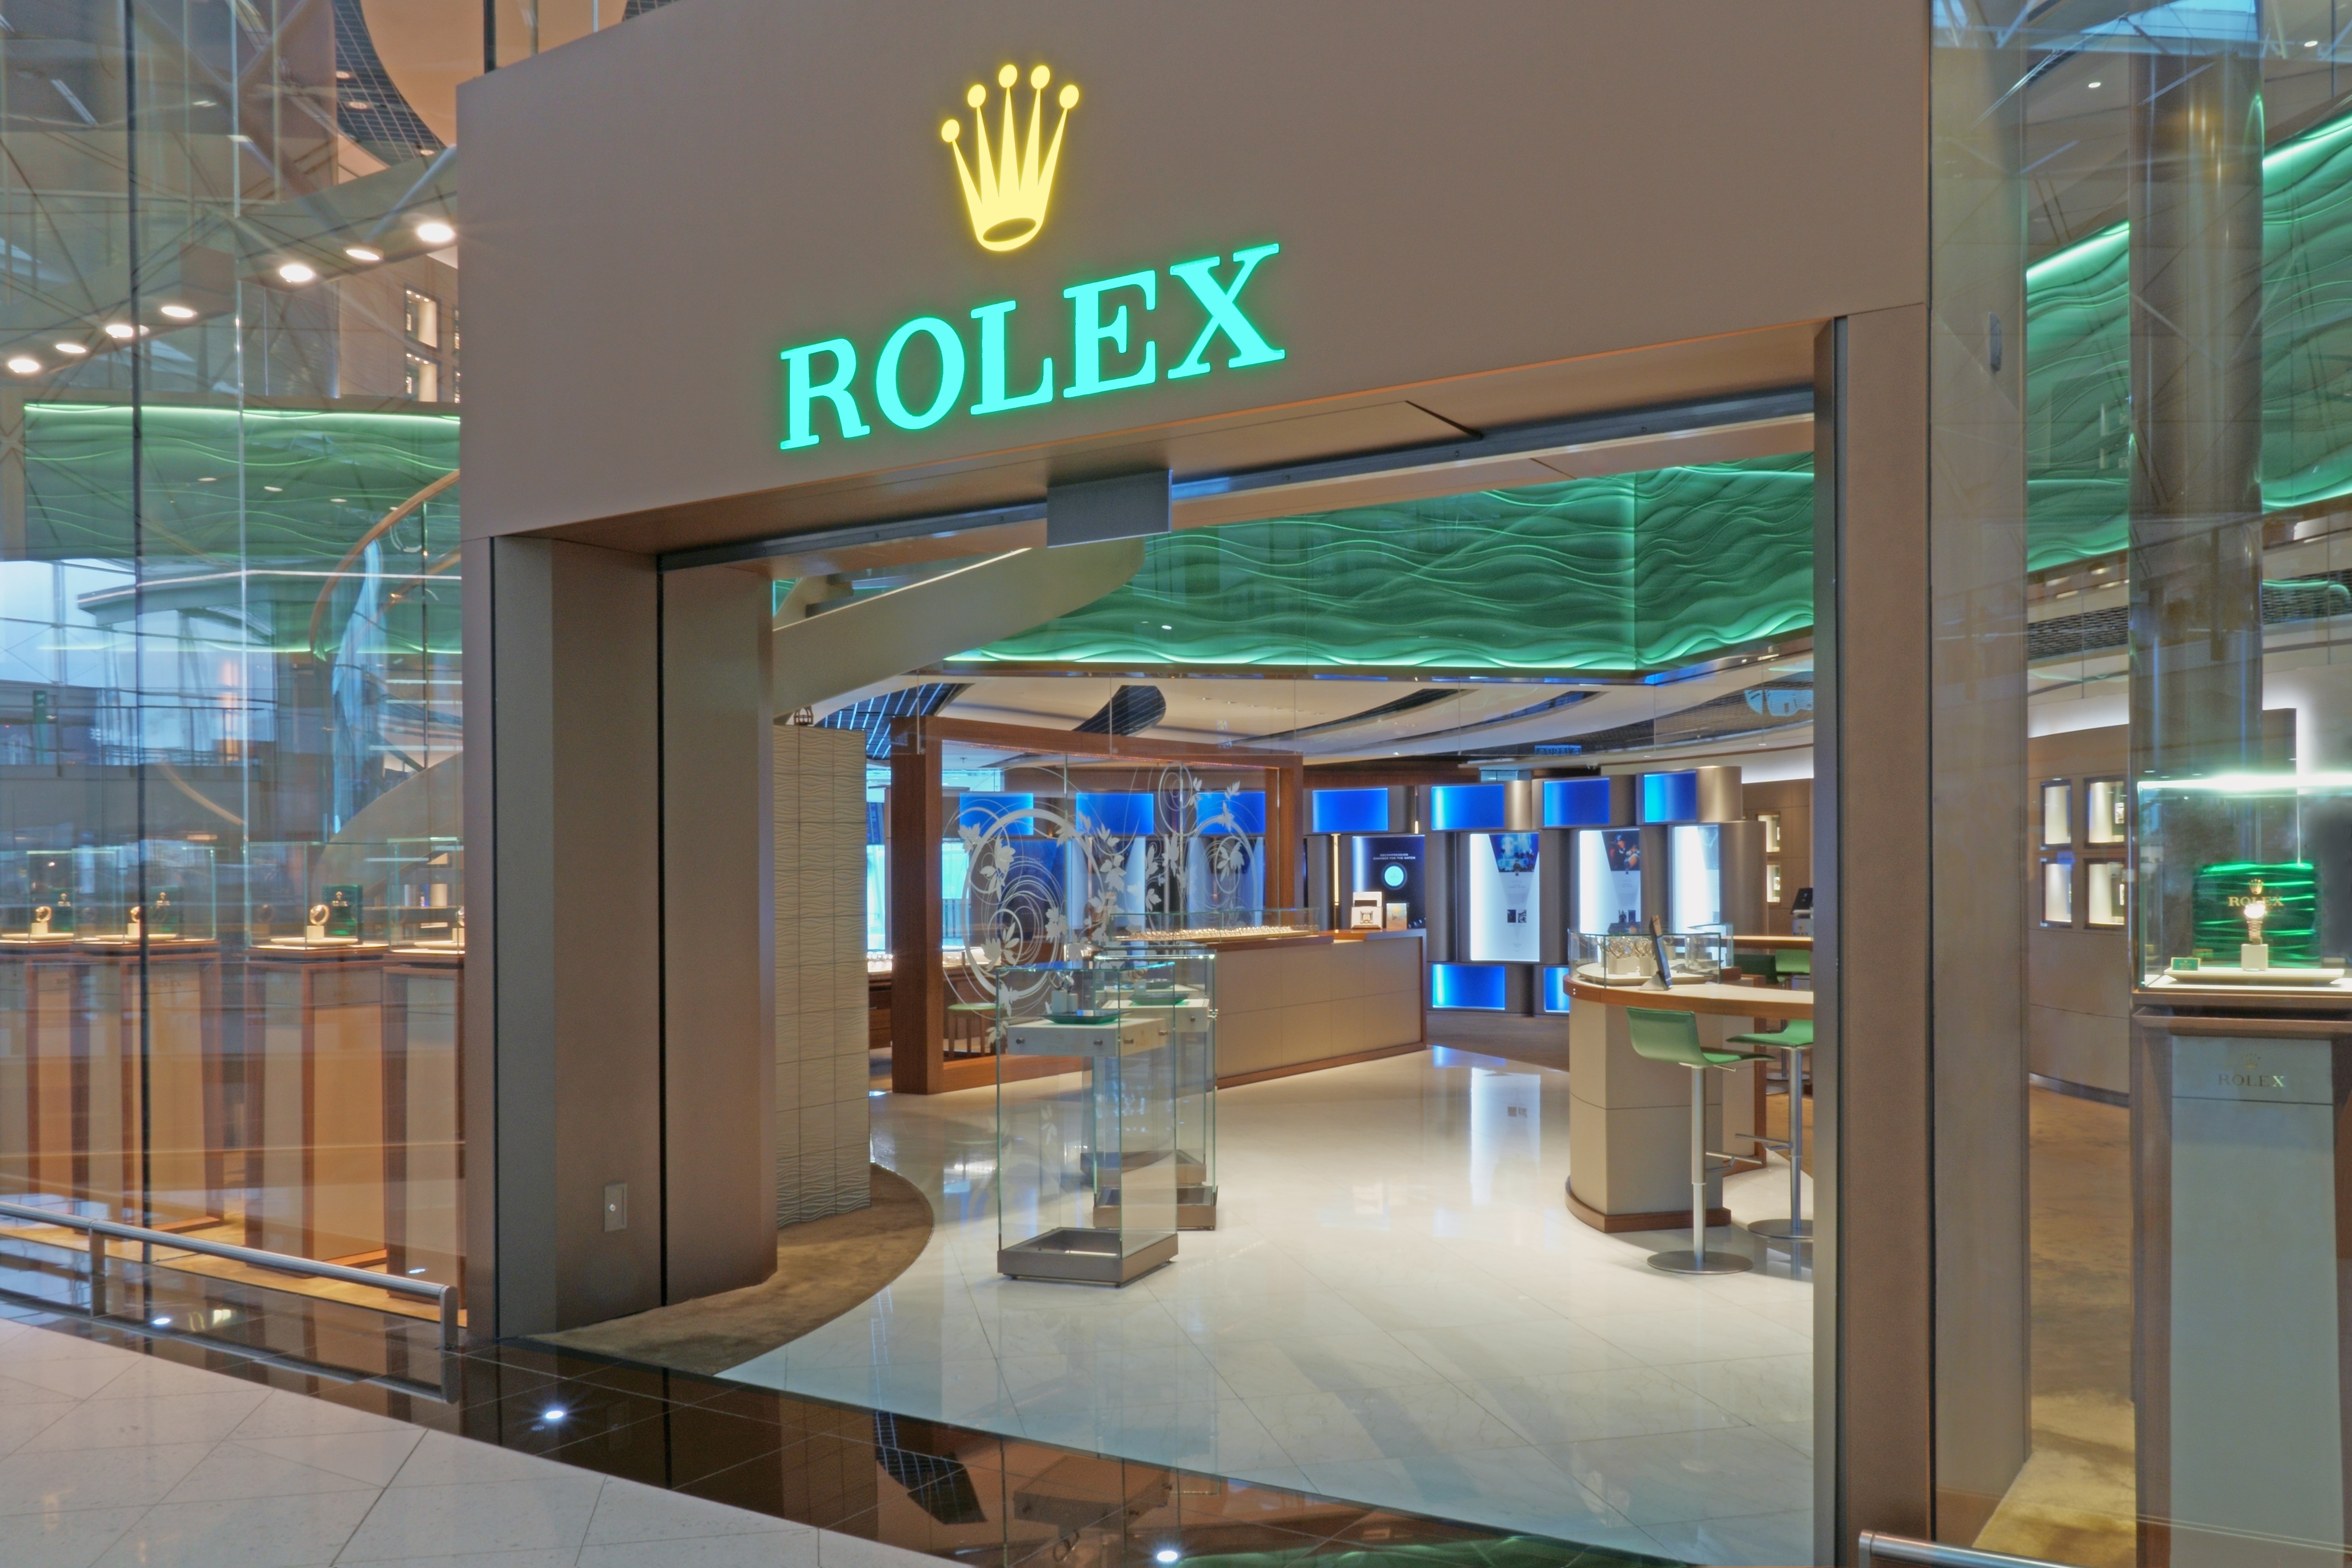 The exhibition is open to the public at the Rolex Icon Store in Terminal 1.